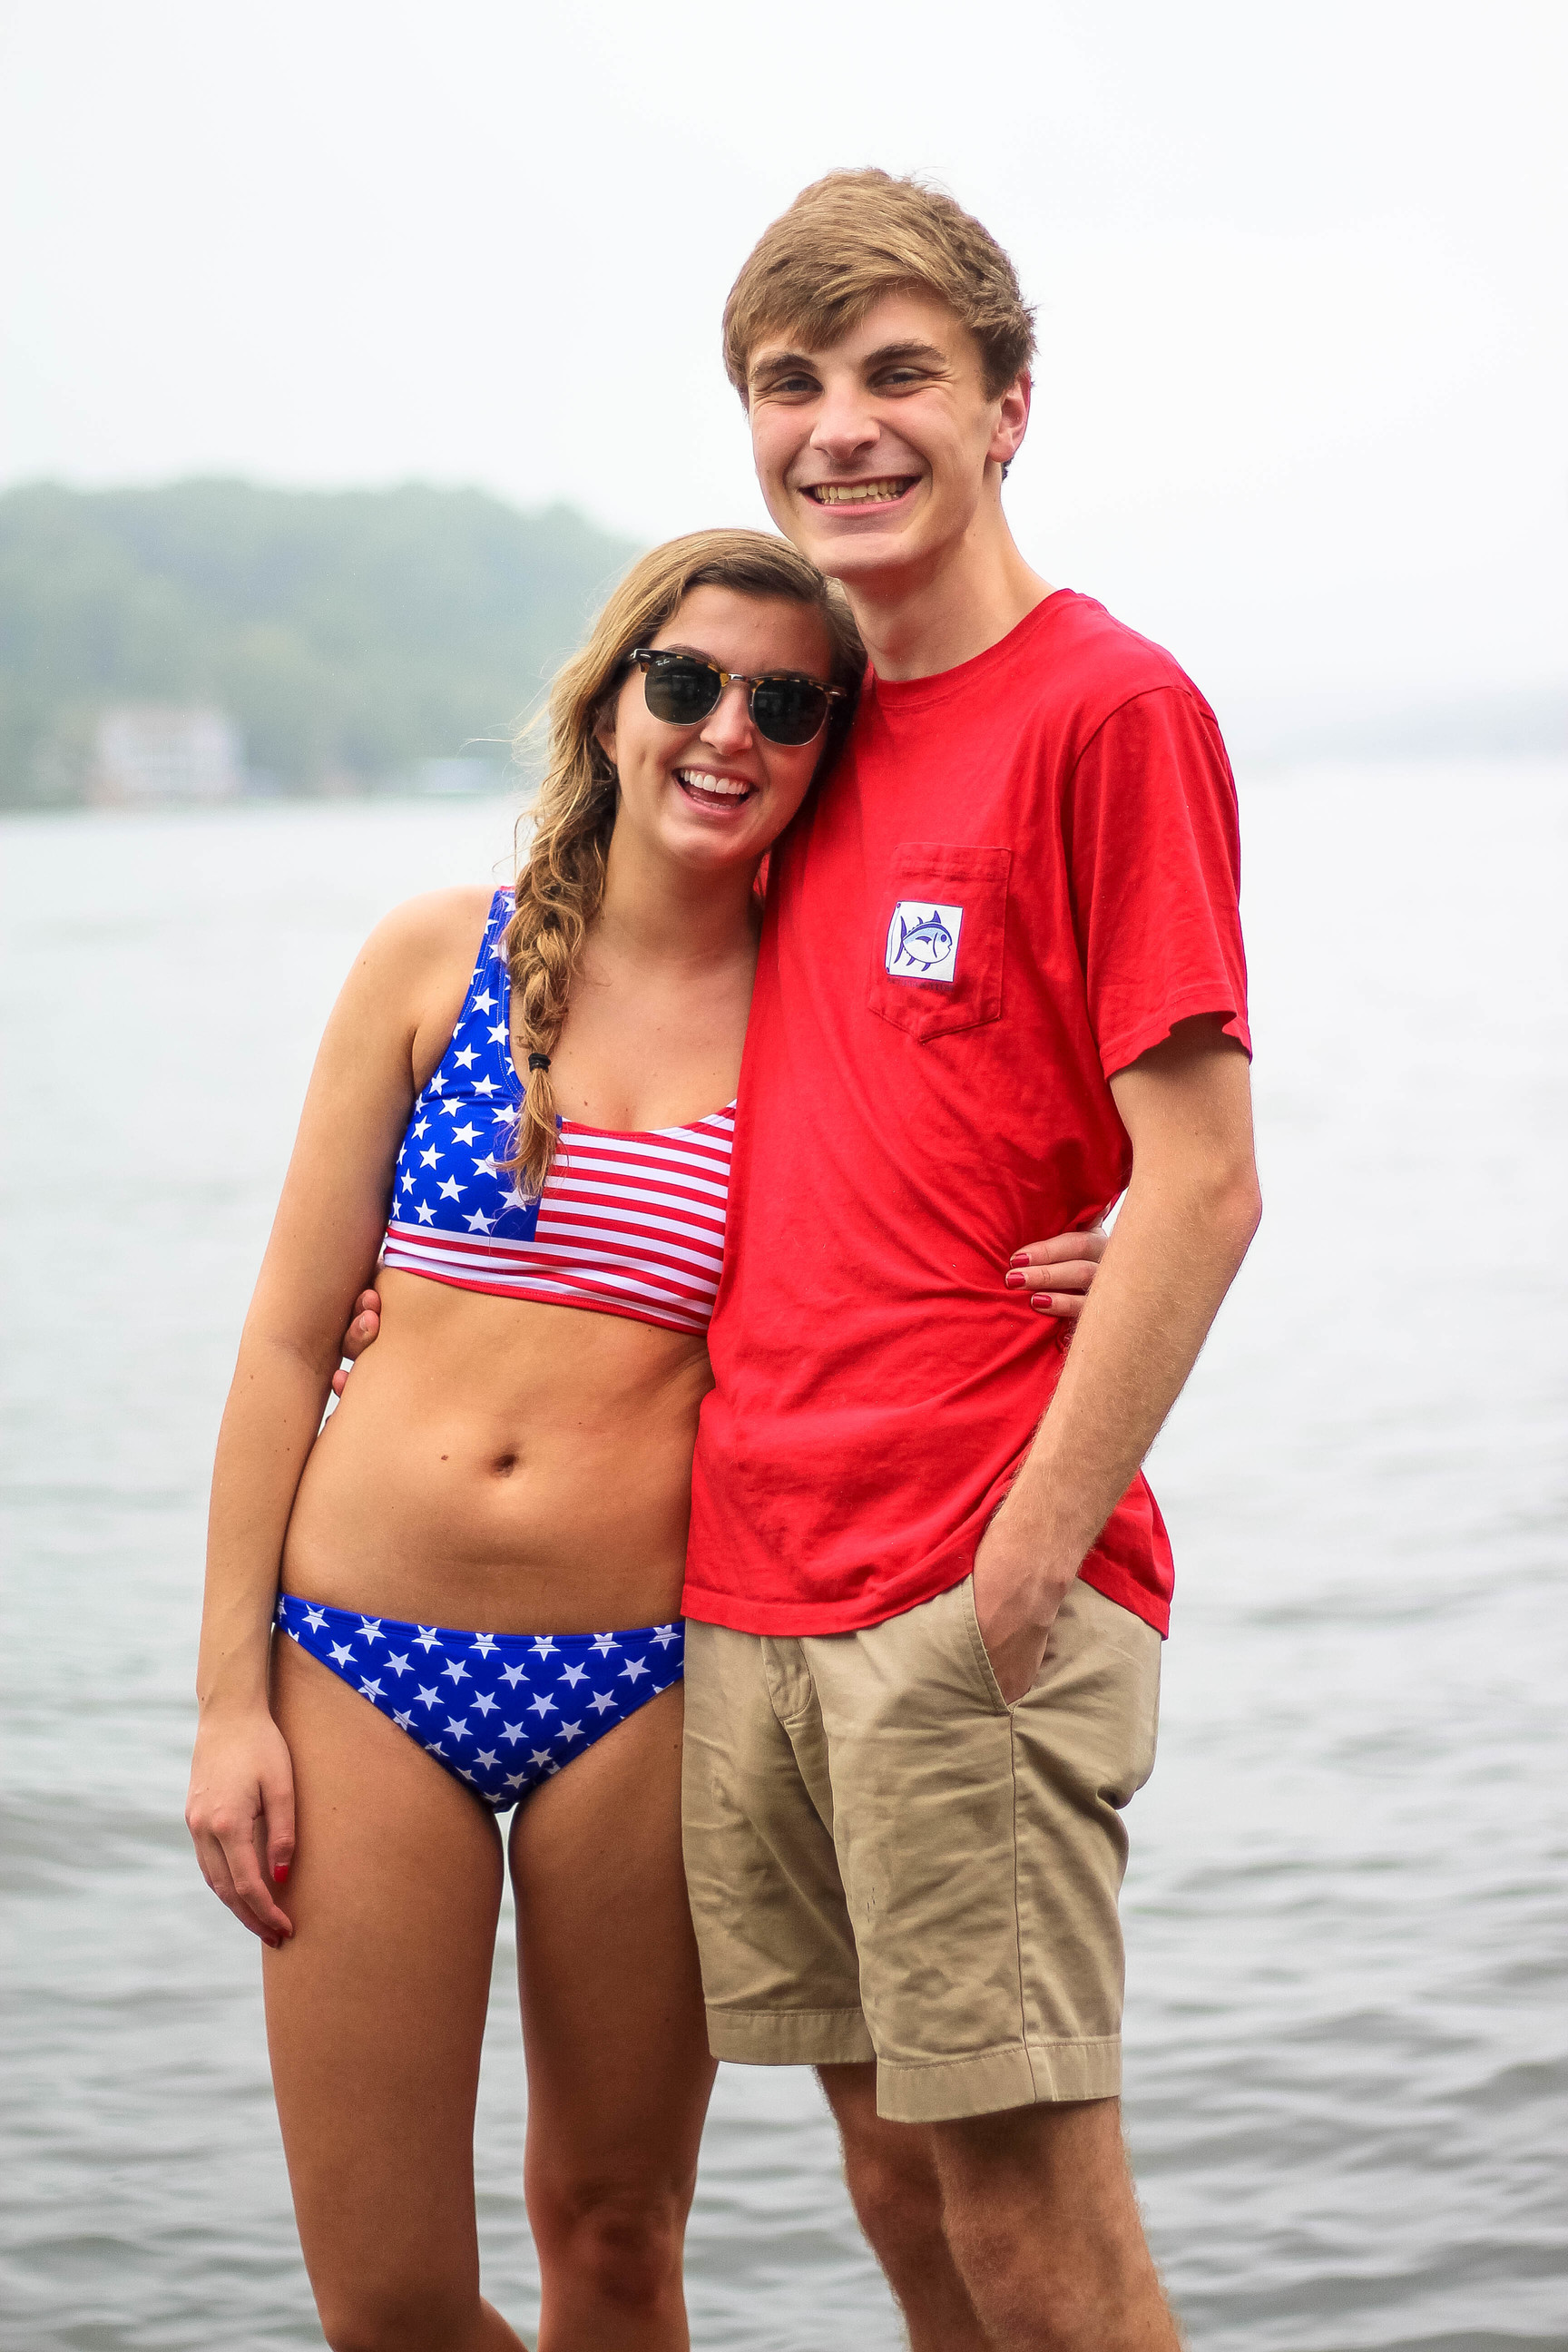 Fourth of July Recap, Write with sparklers, american girl by lauren lindmark on daily dose of charm